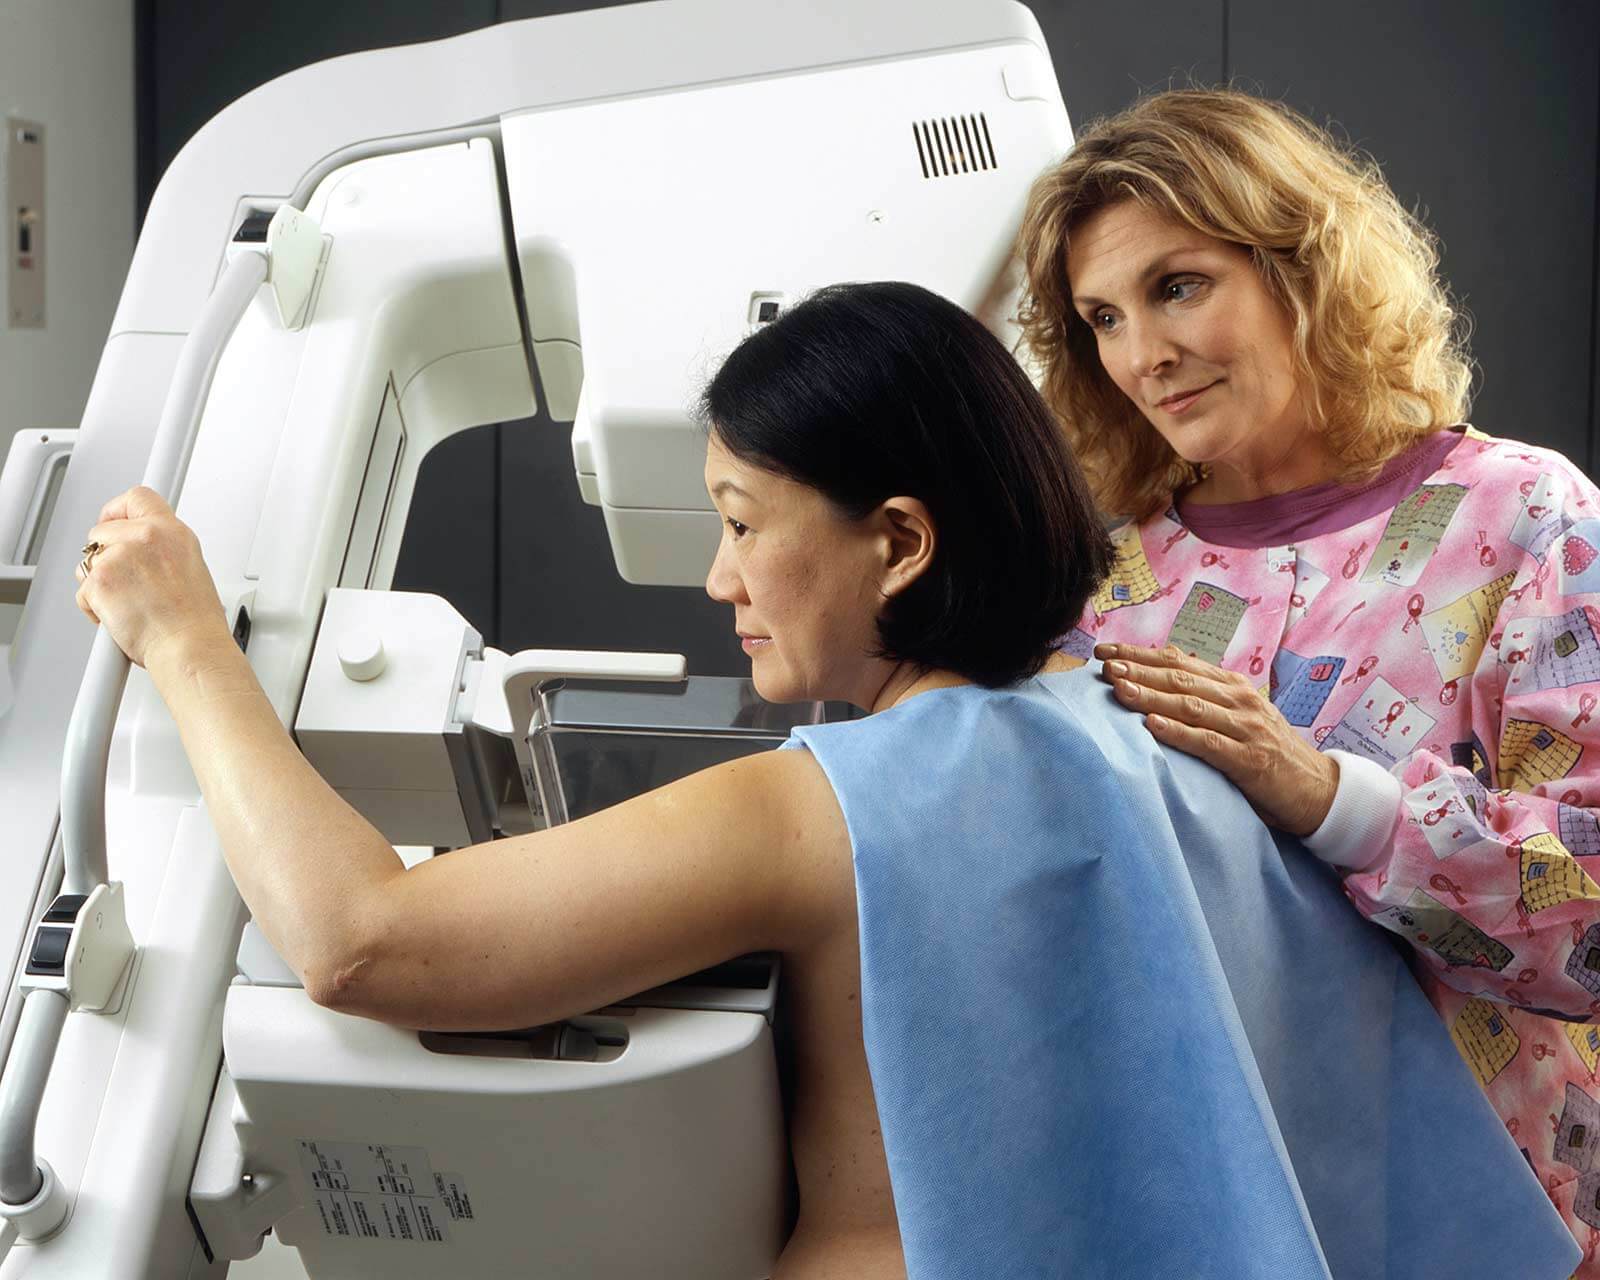 A healthcare worker places a reassuring hand on the shoulder of a woman during a mammogram